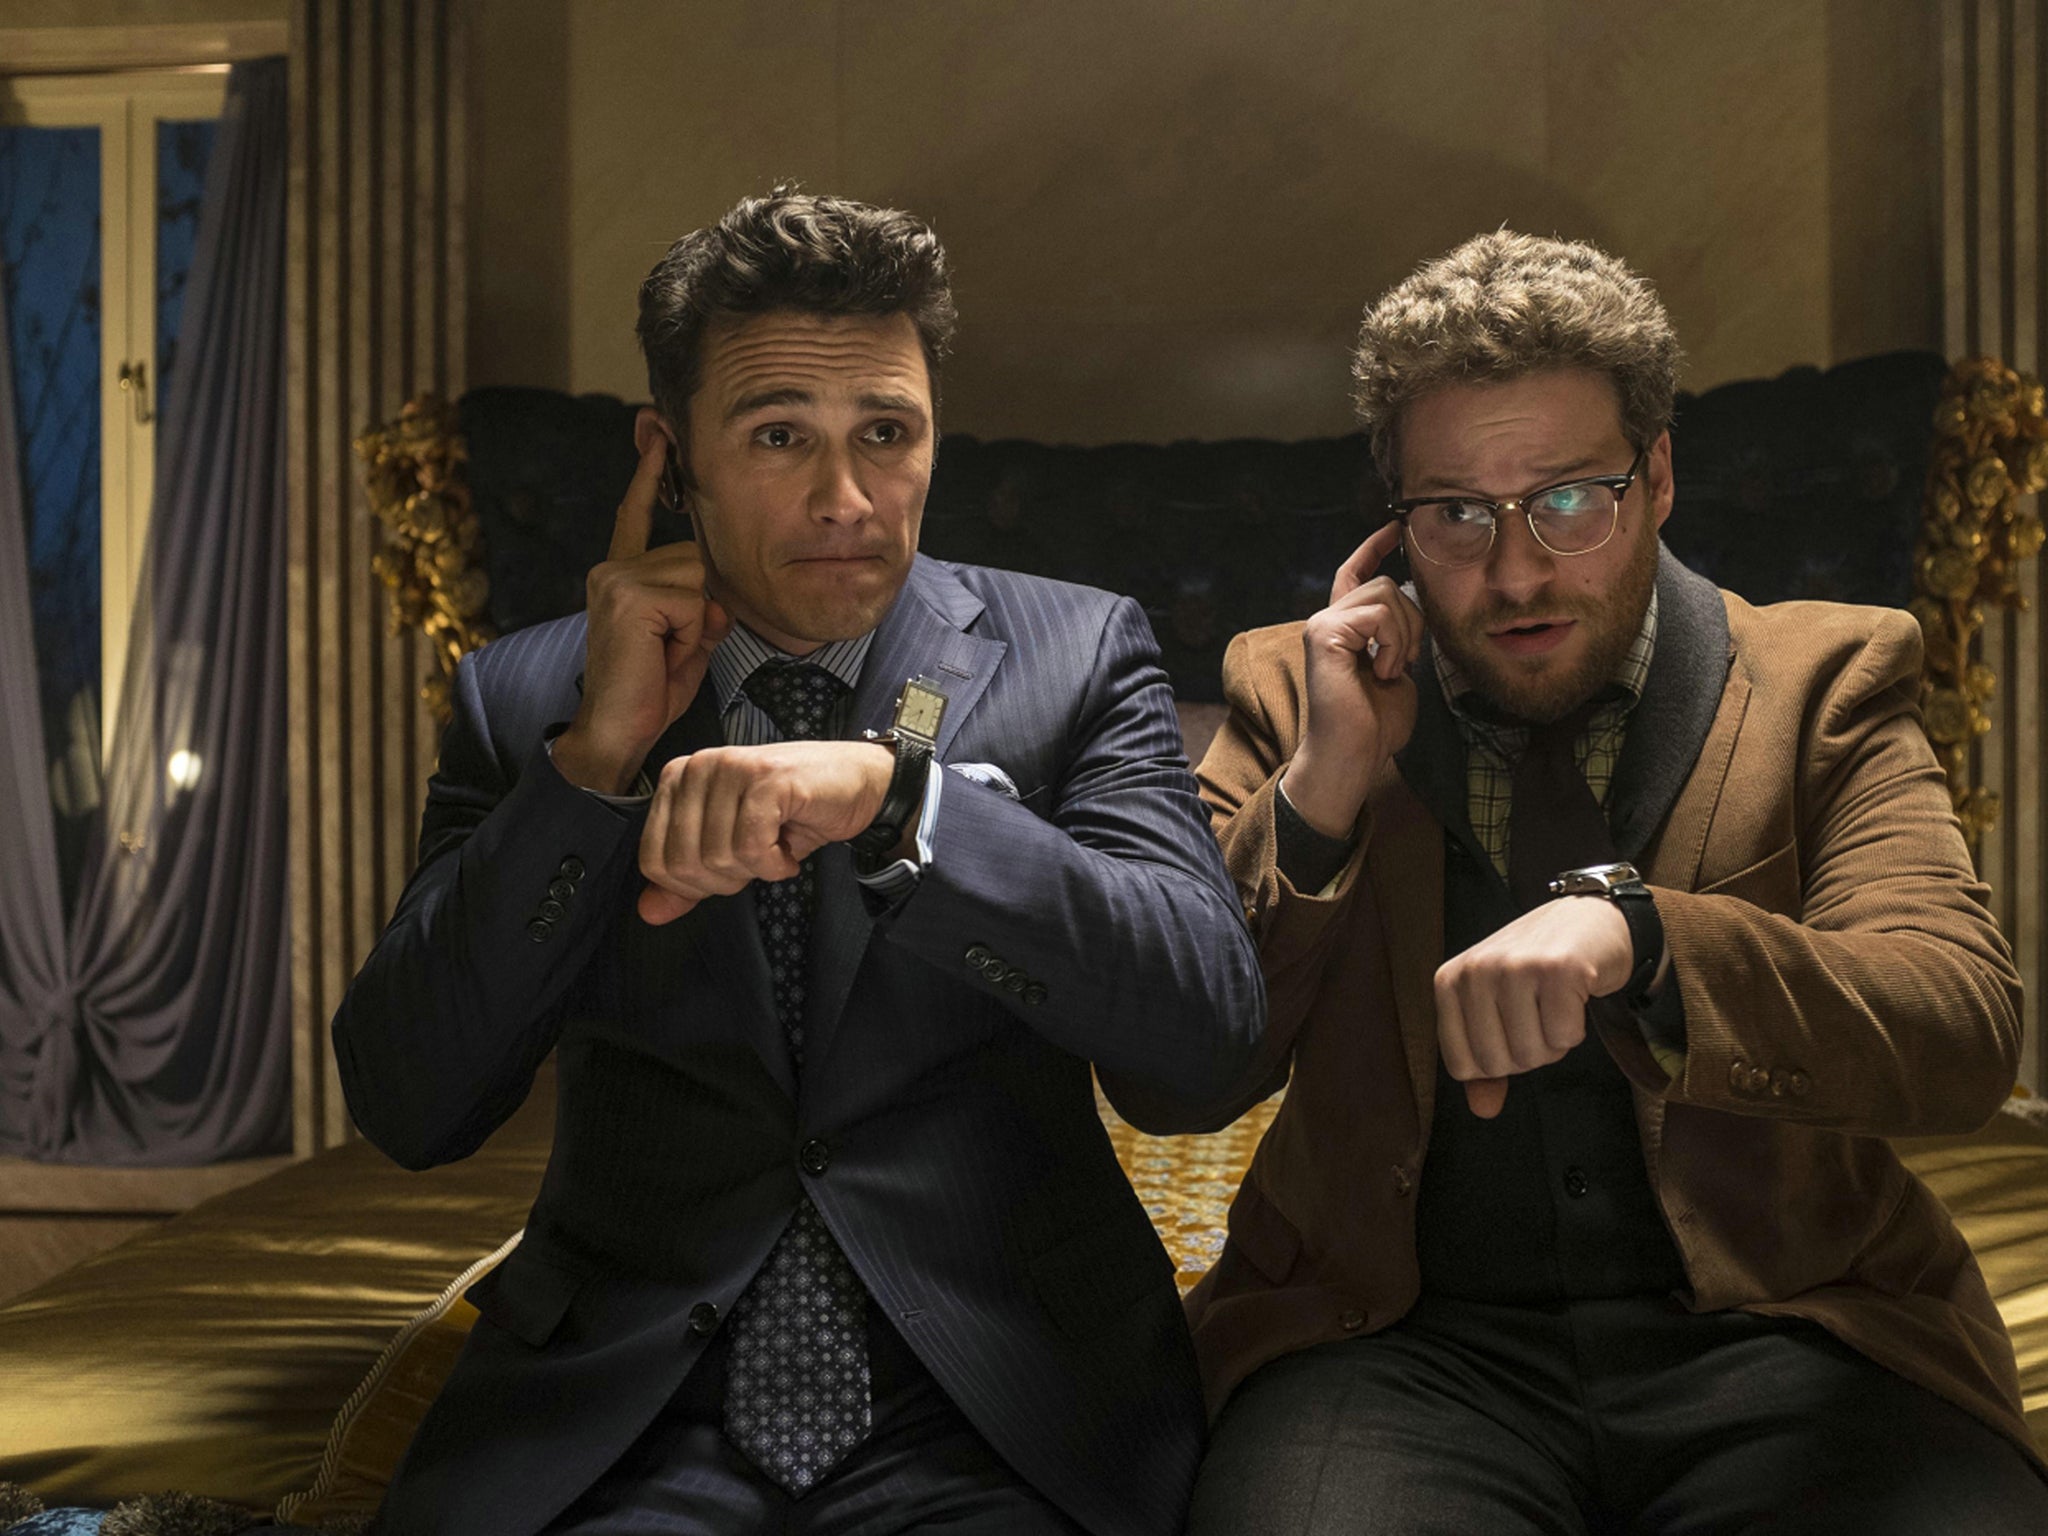 A still from 'The Interview' starring Seth Rogan (right) and James Franco, which is believed to have caused upset